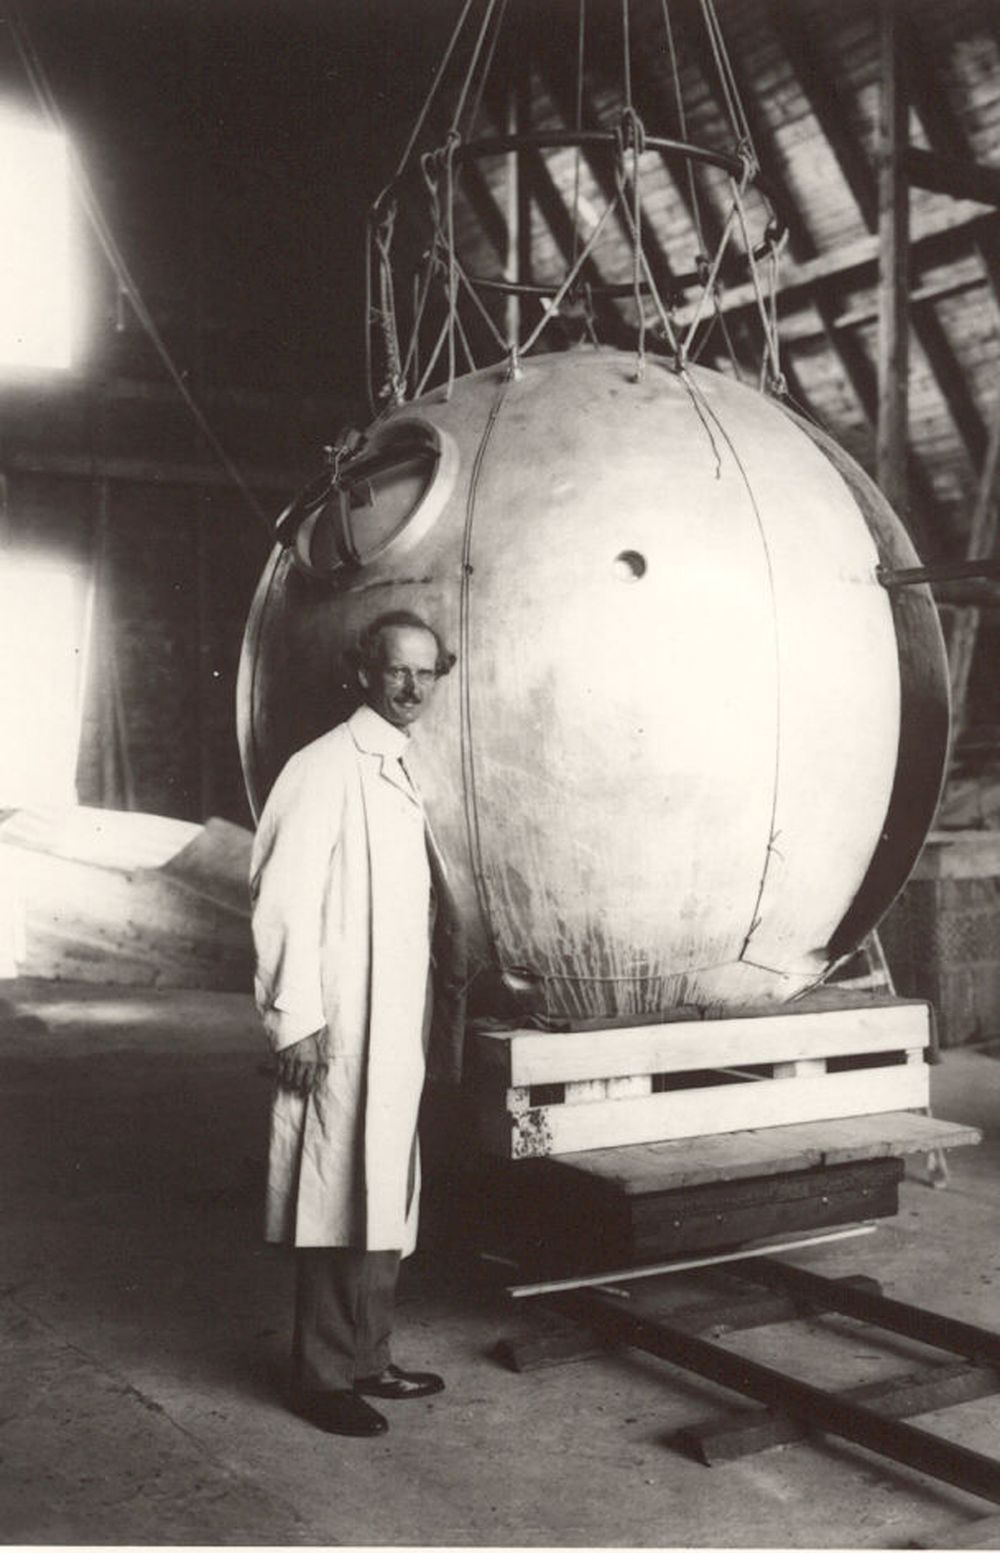 Auguste Piccard with the gondola that he designed.